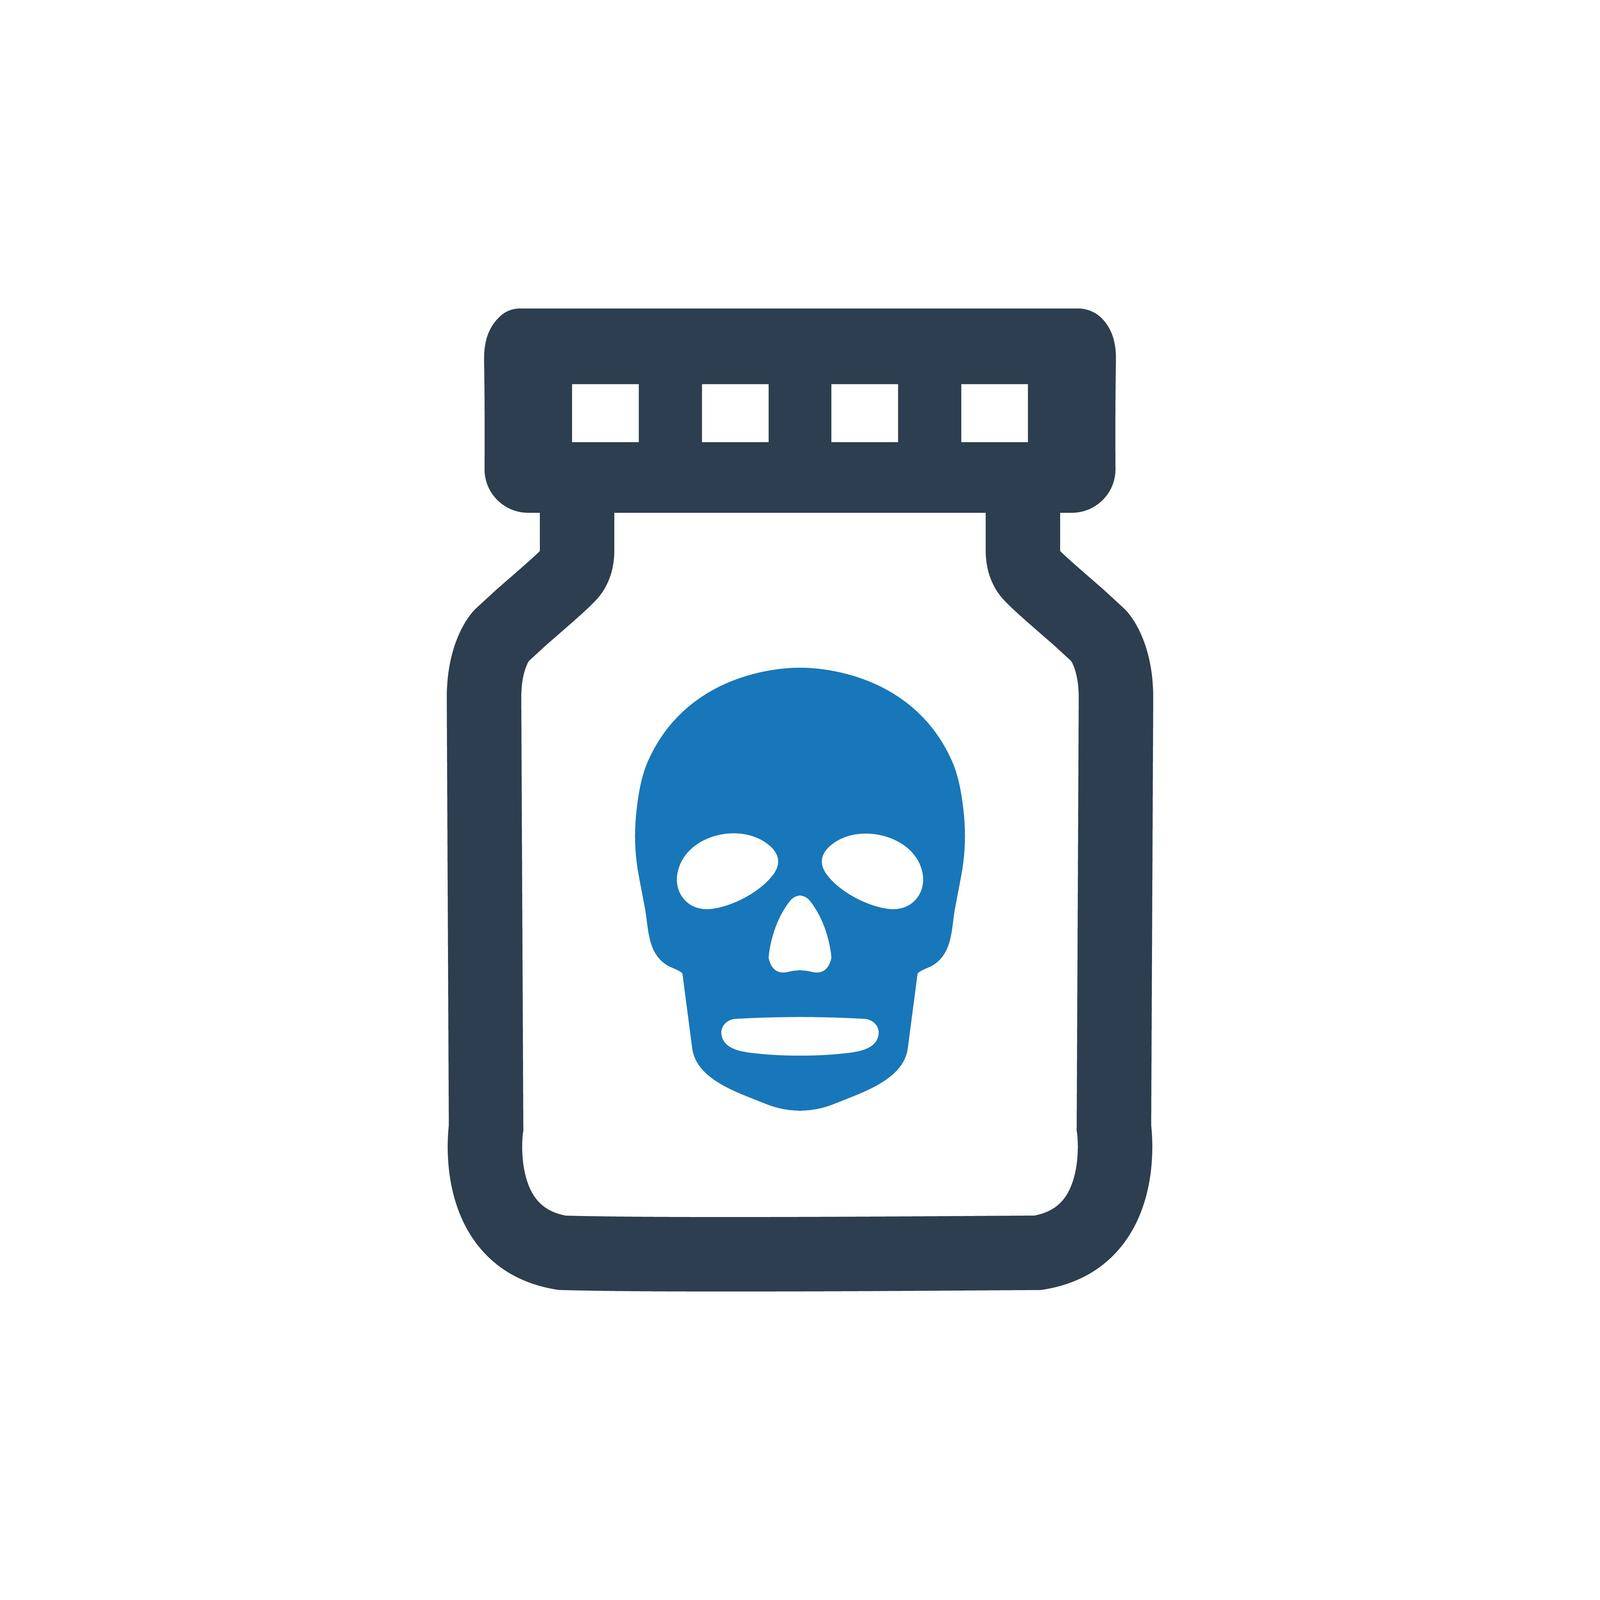 Toxic Bottle icon. Vector EPS file.